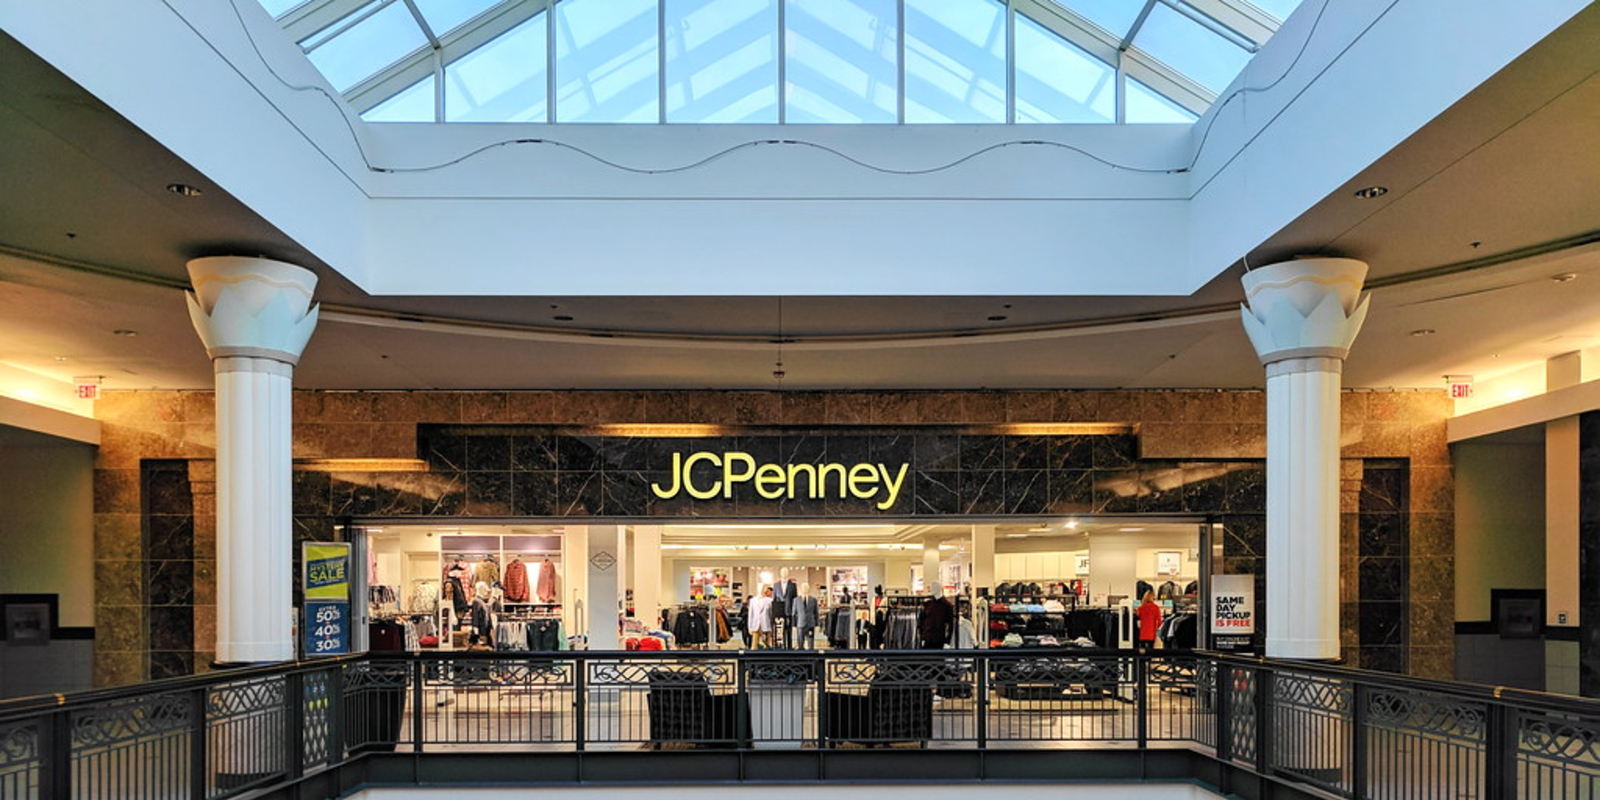 J. C. Penney: Activist Investors and the Rise and Fall of Ron Johnson